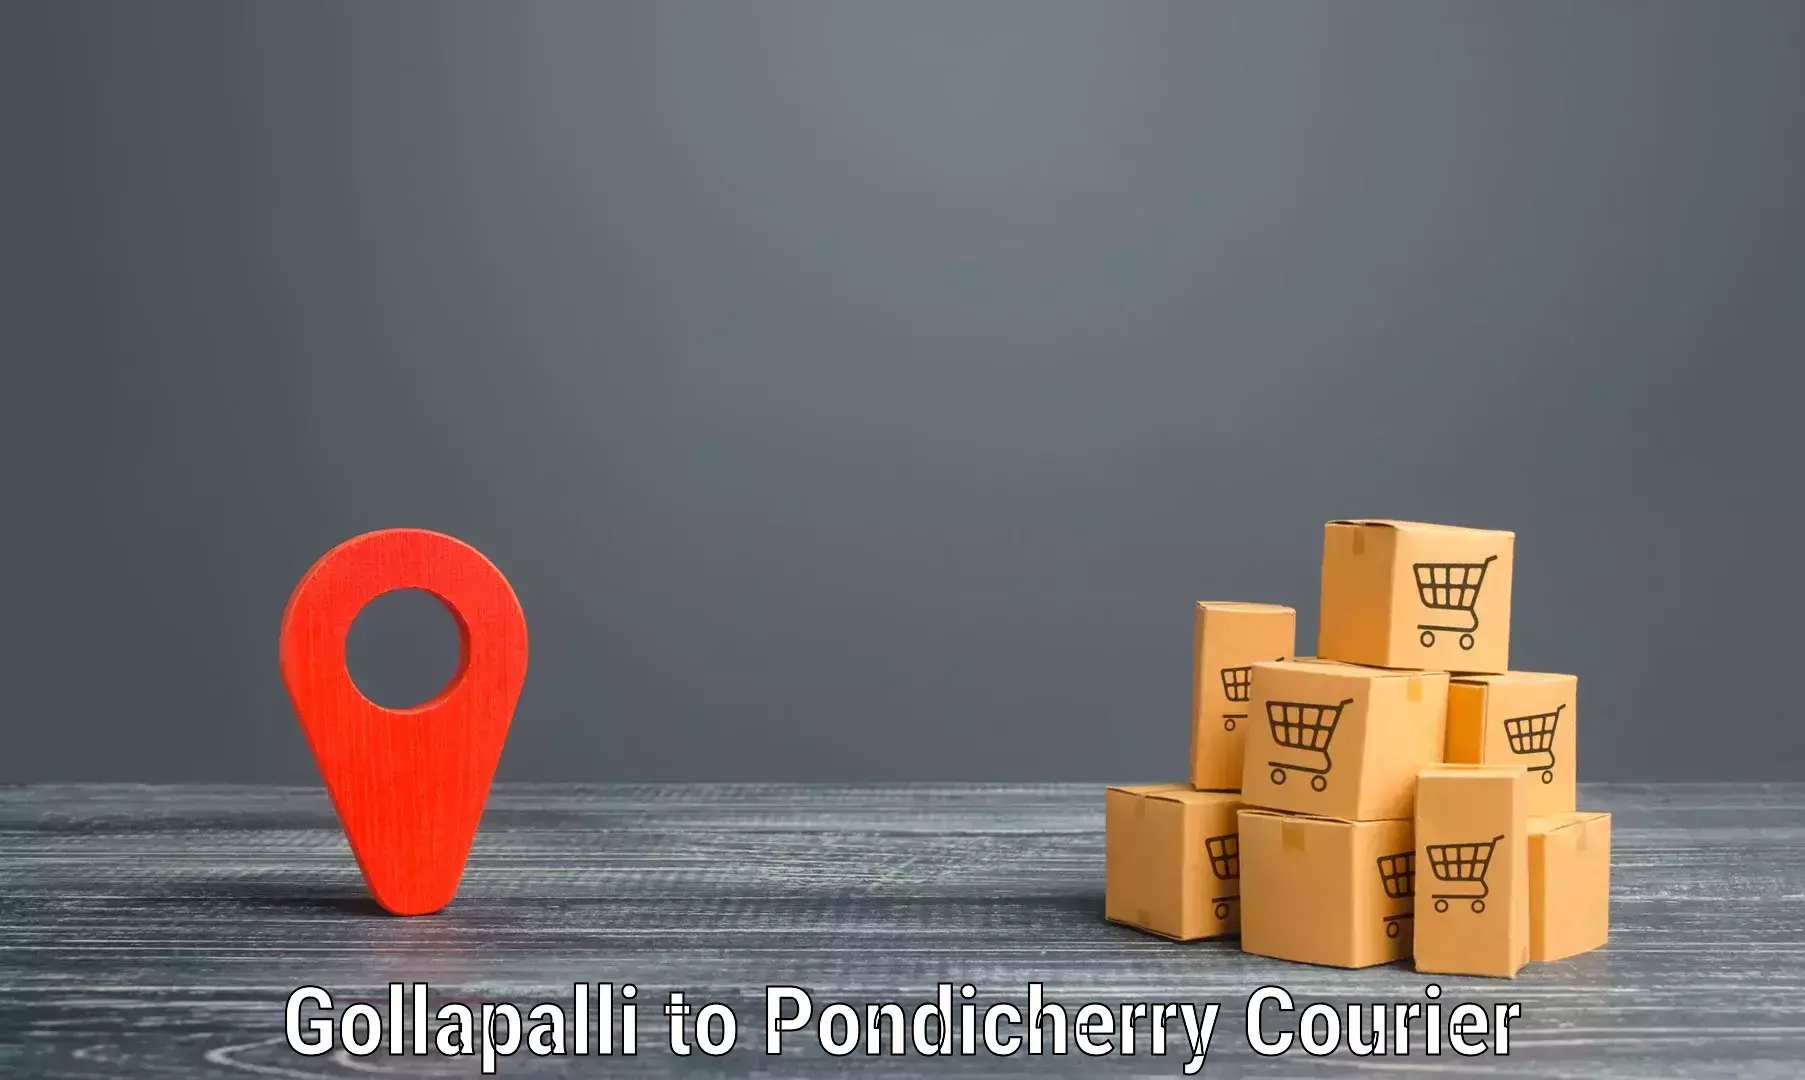 Easy access courier services Gollapalli to Pondicherry University